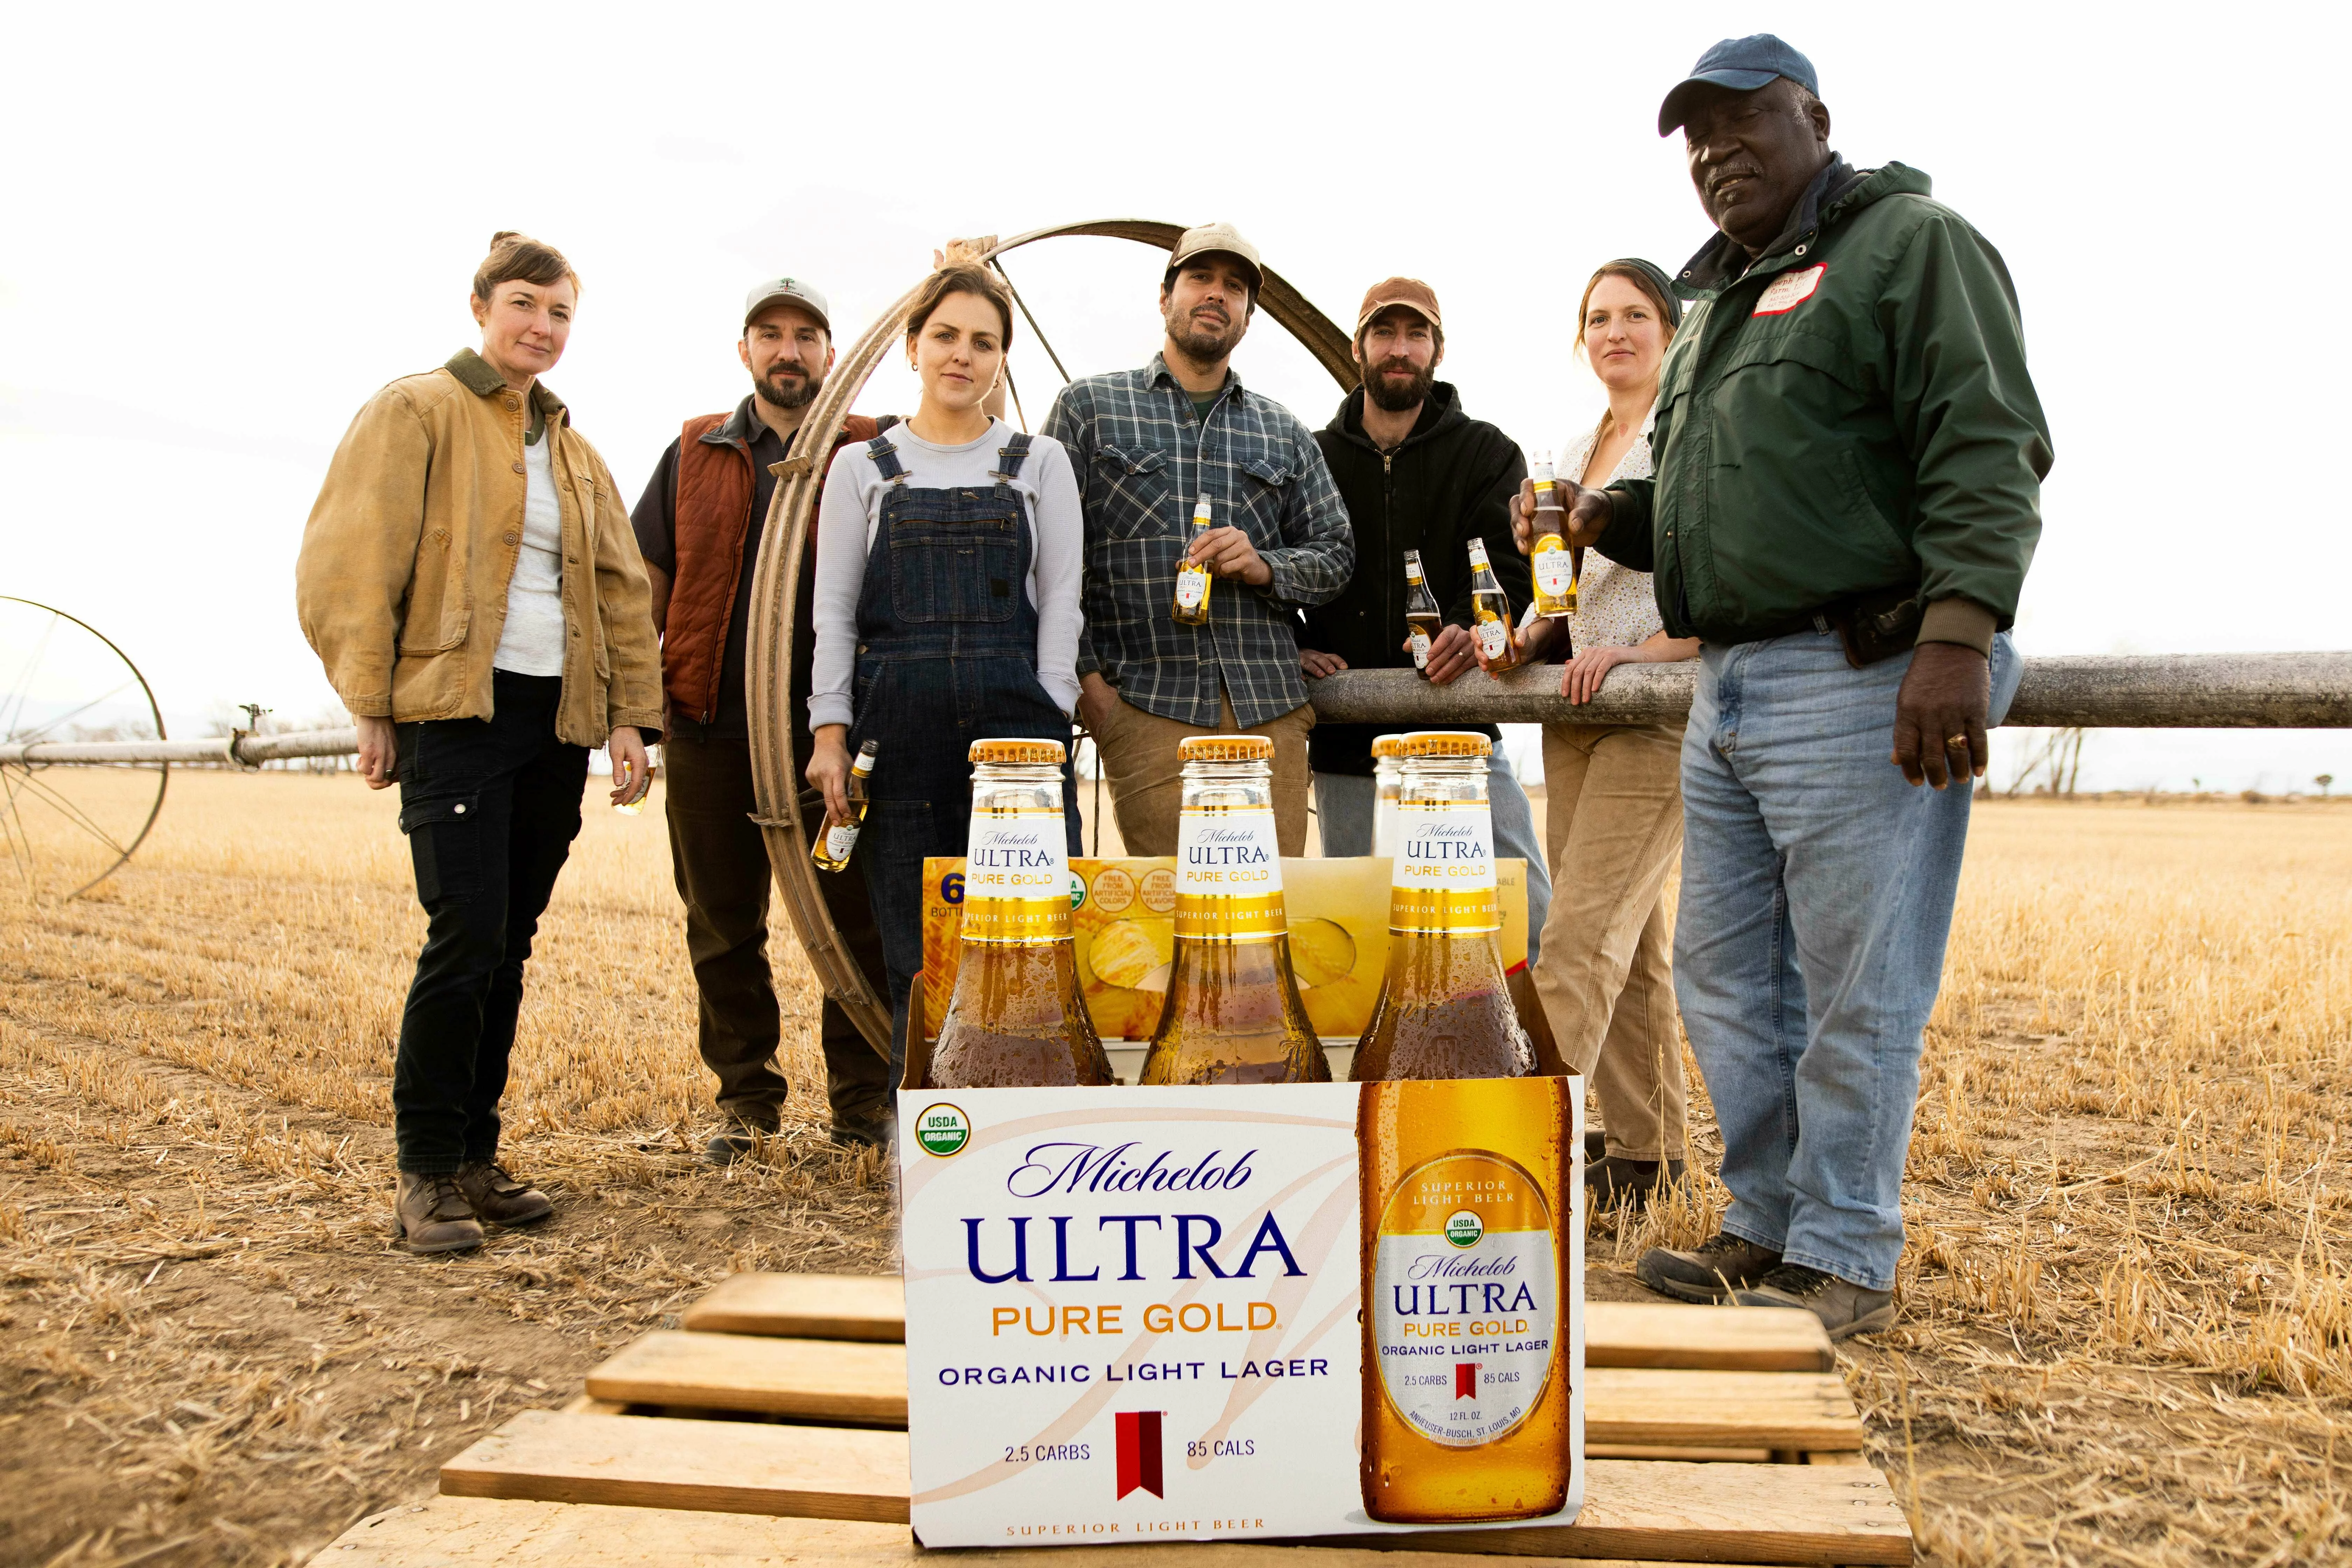 Michelob Ultra Pure Gold uses its Super Bowl ad to plug program for organic farming